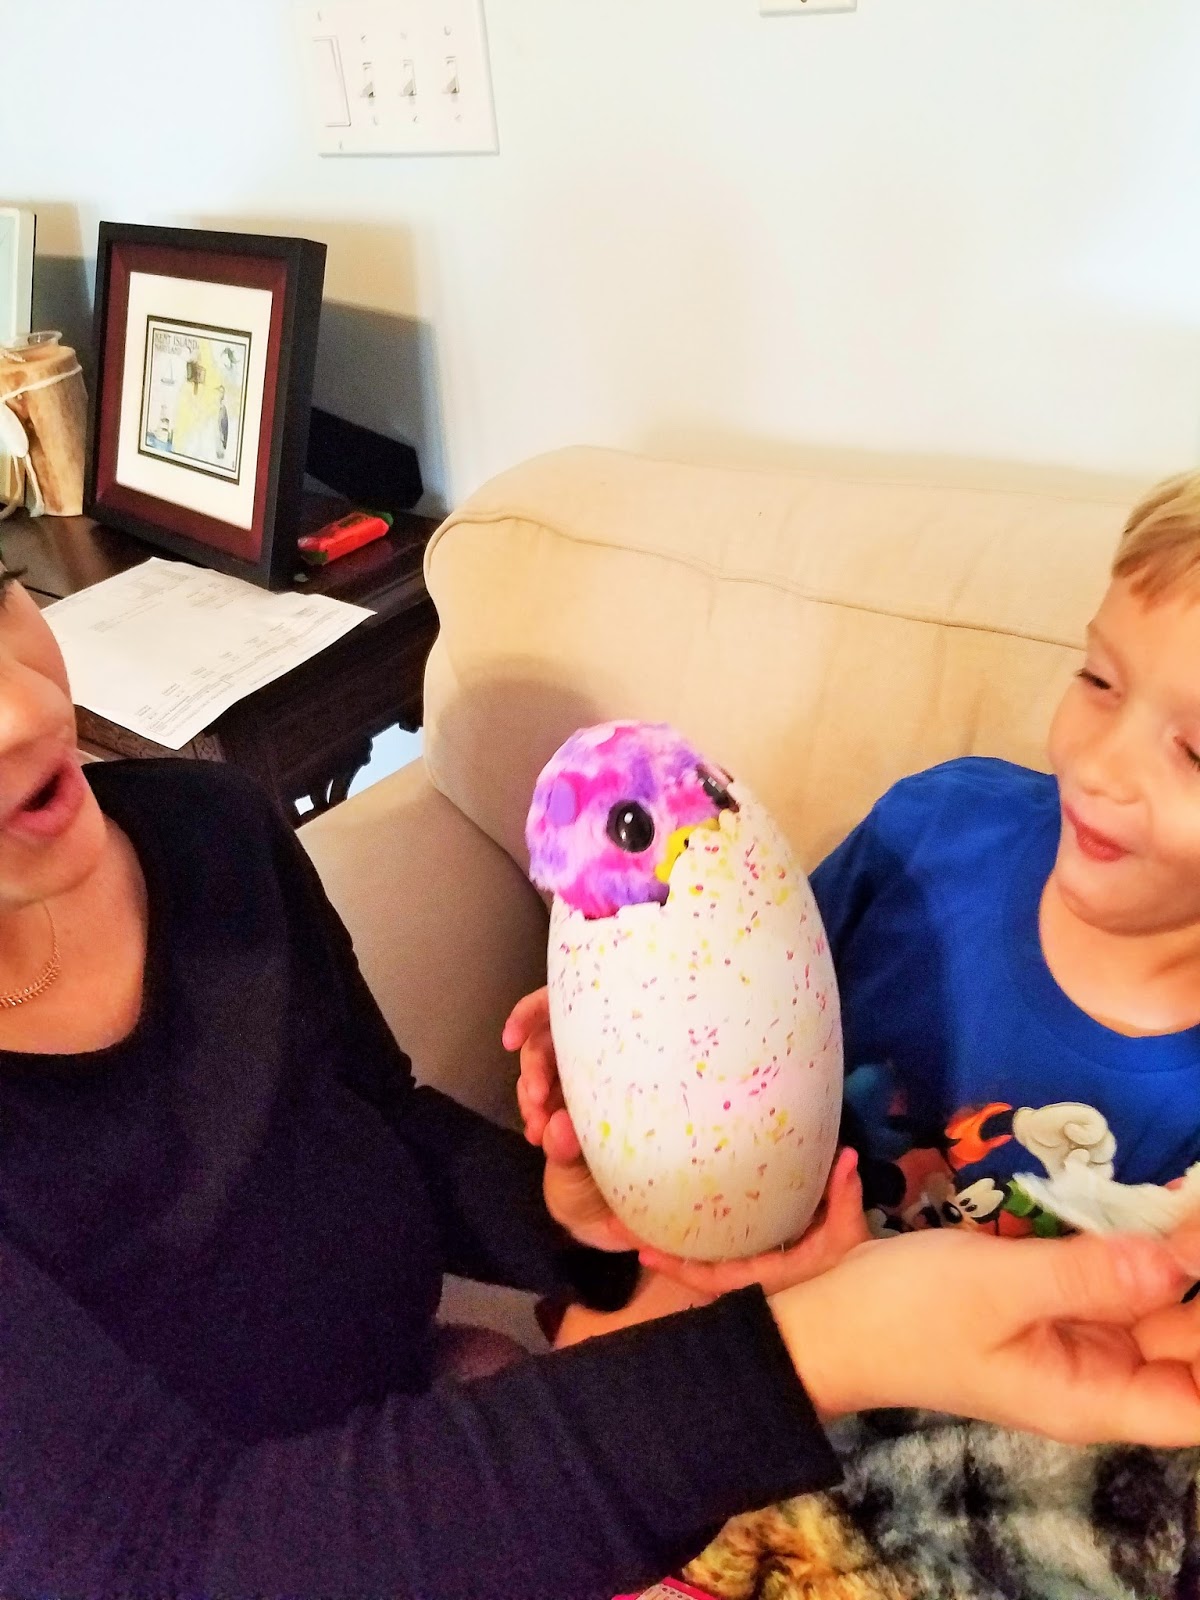 Hatchimals Surprise: Where To Find and Order the New Toys